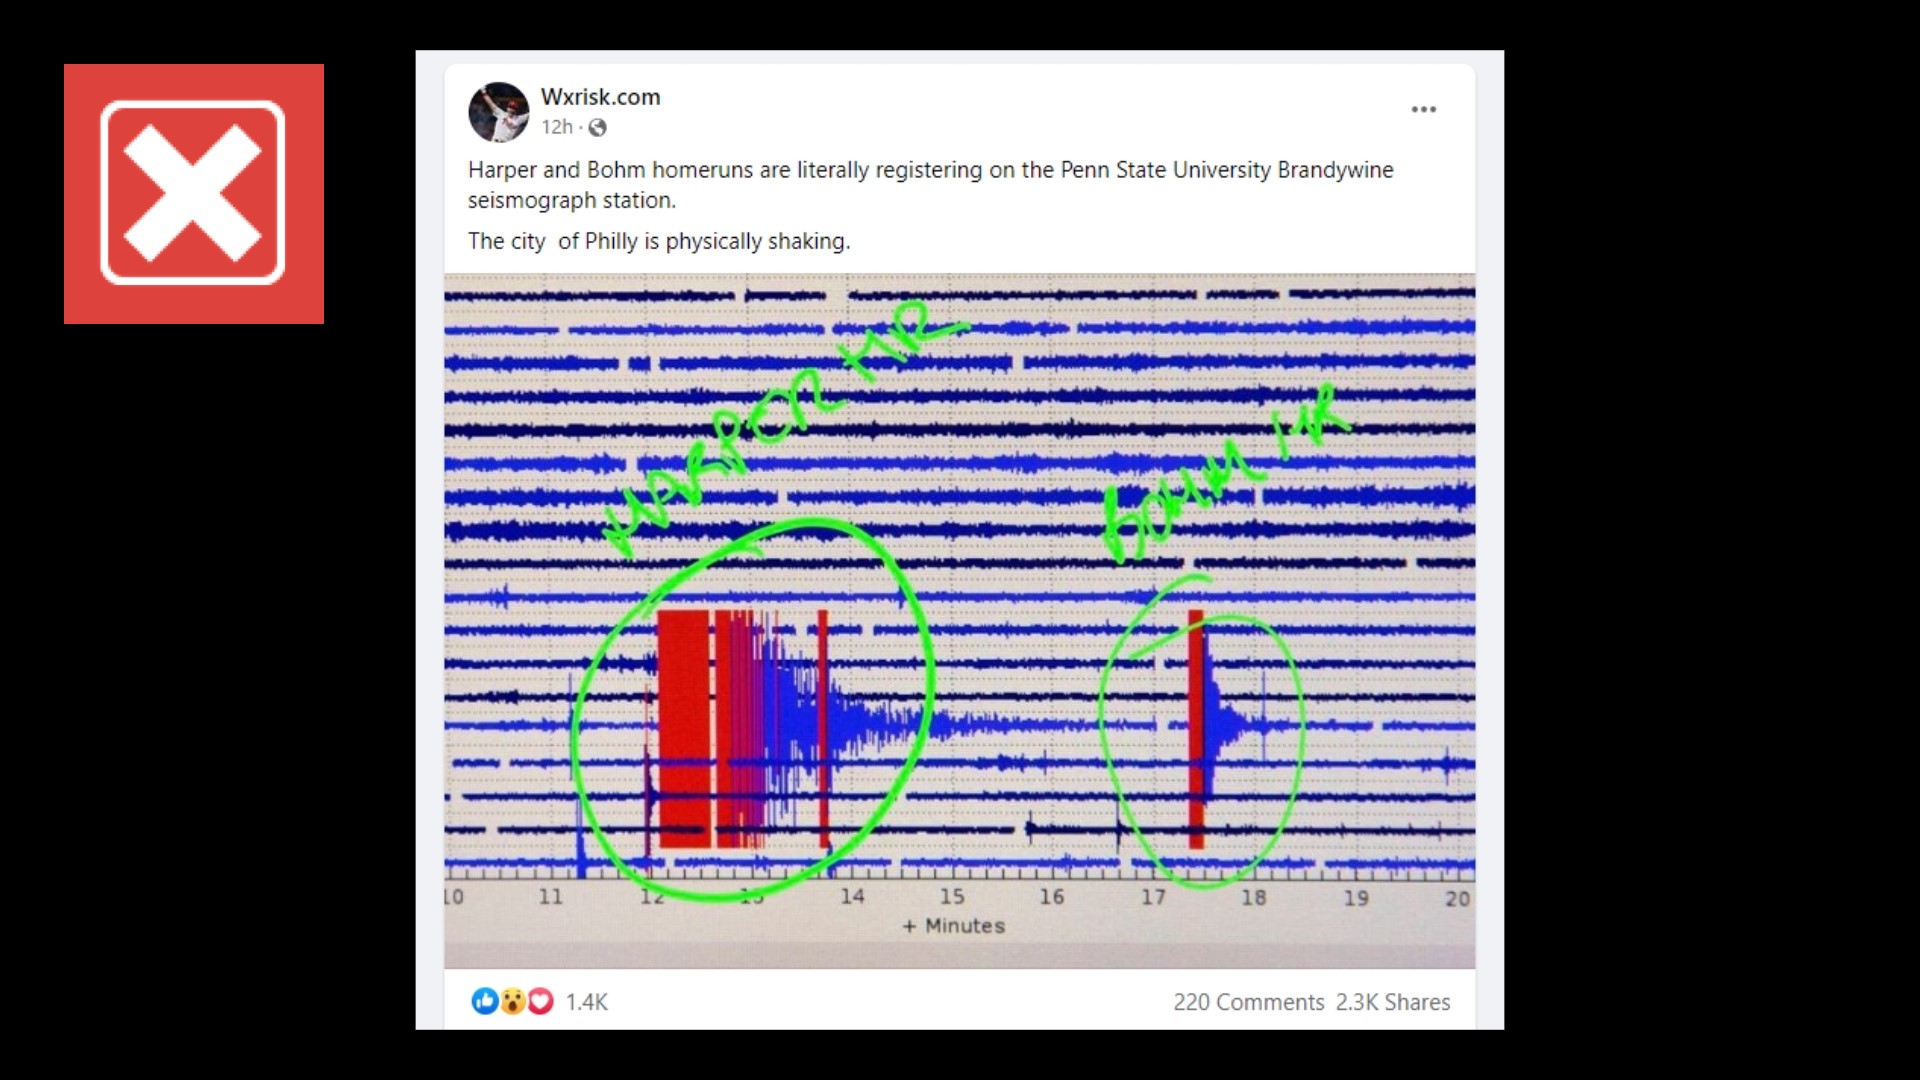 A viral tweet that made its way to Facebook claimed two Phillies home runs registered on PSU Brandywine's seismograph. The University disagrees.